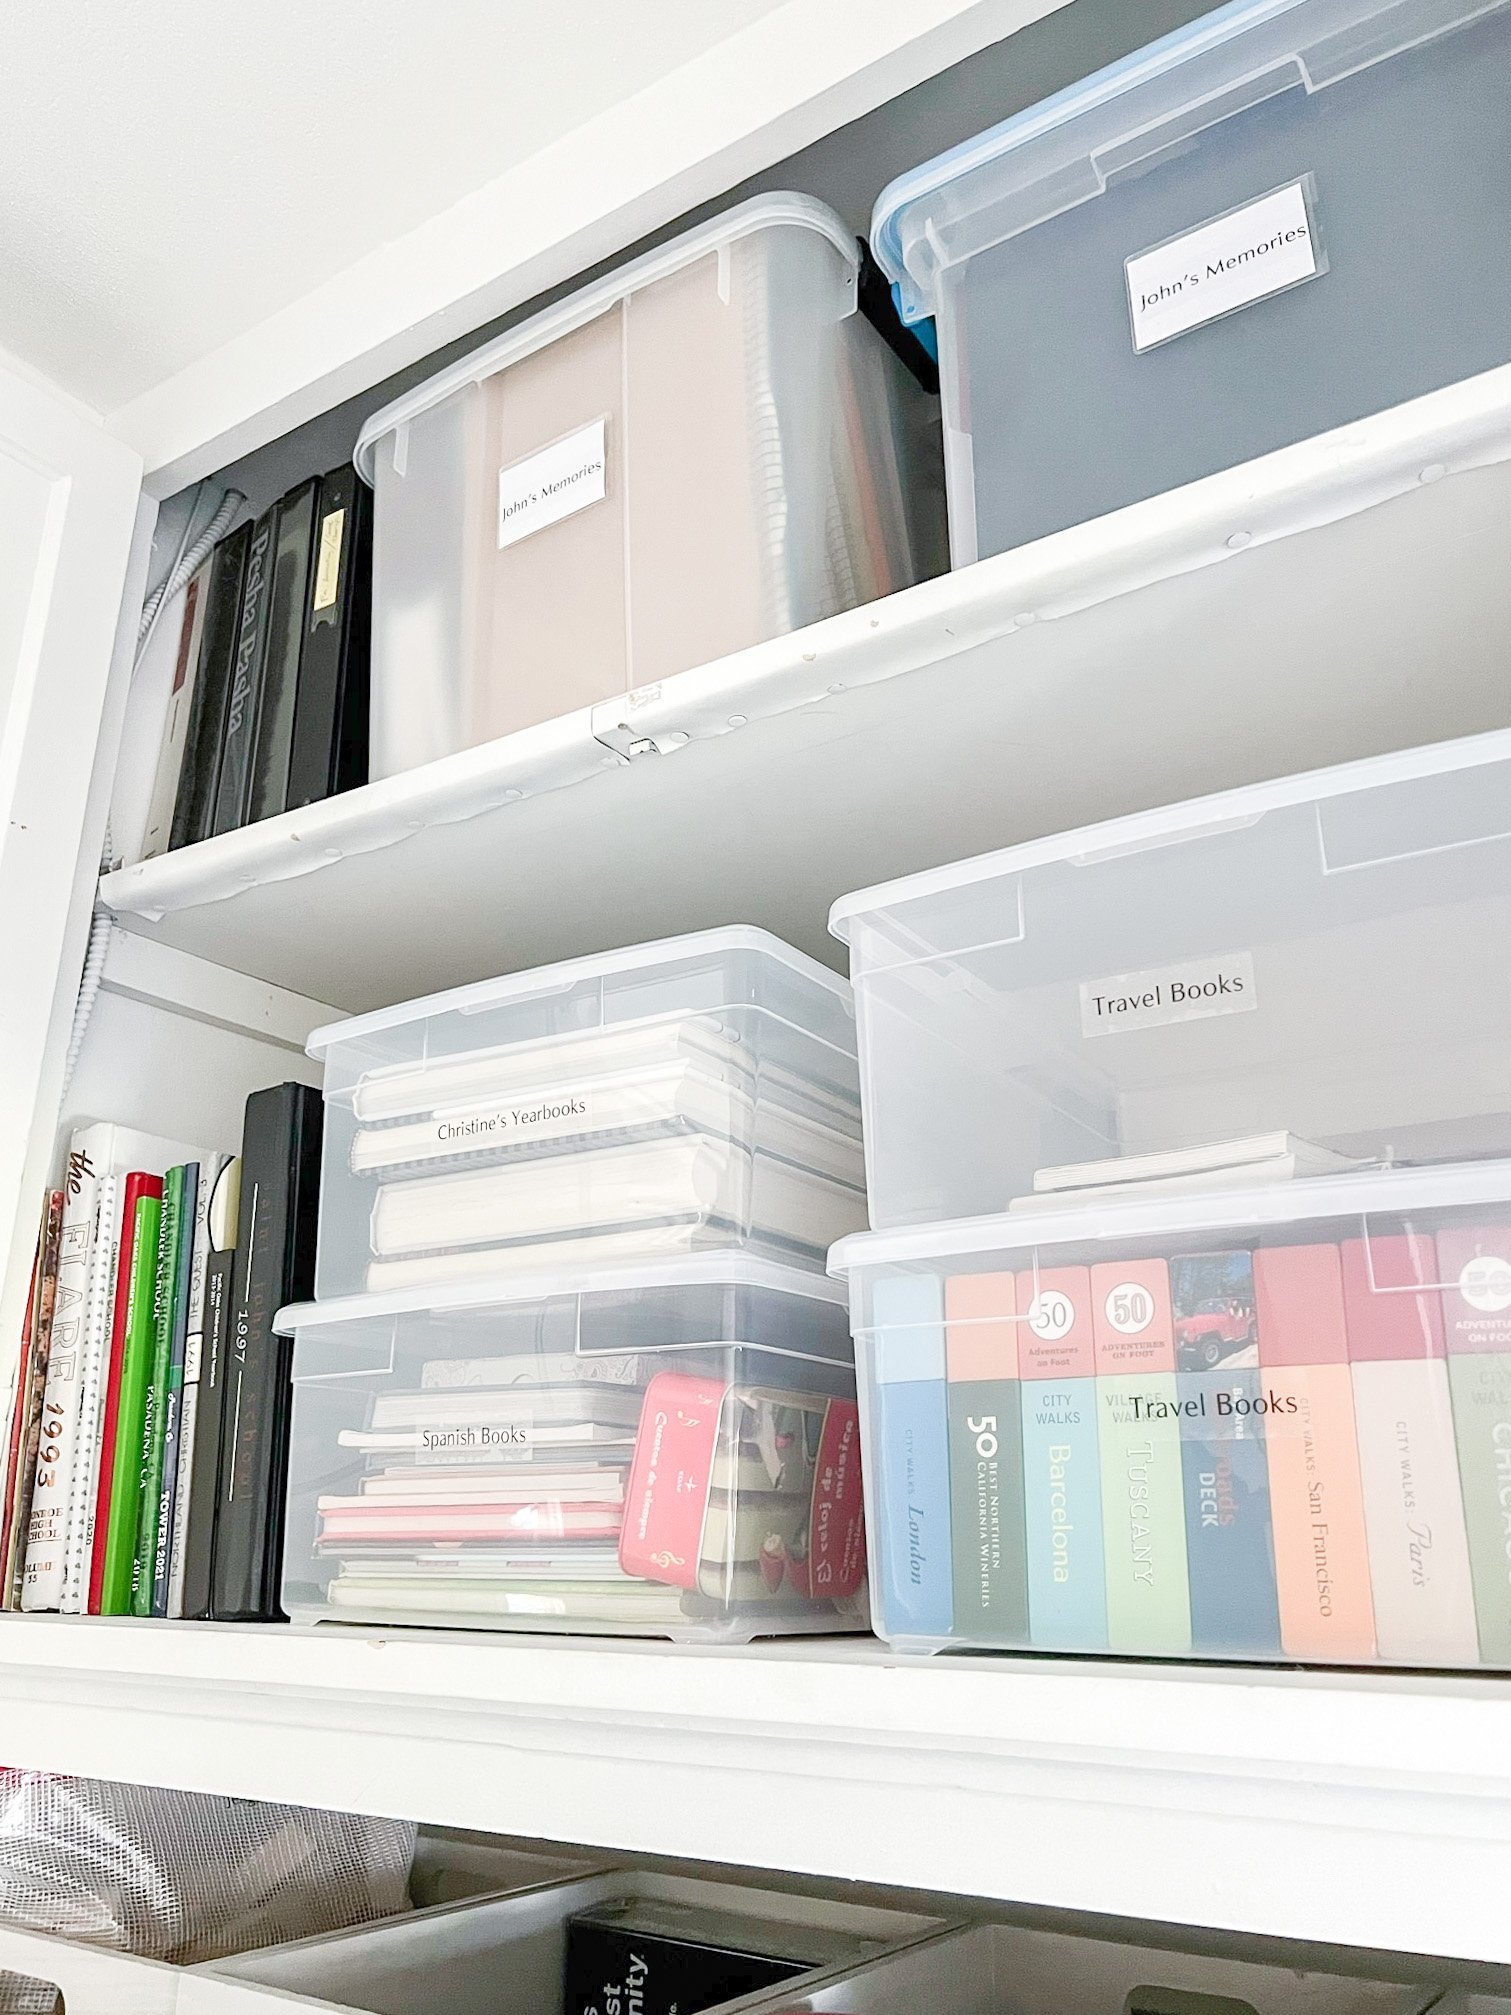 Storing Photos  Ditch the Old Albums - A Thoughtful Place